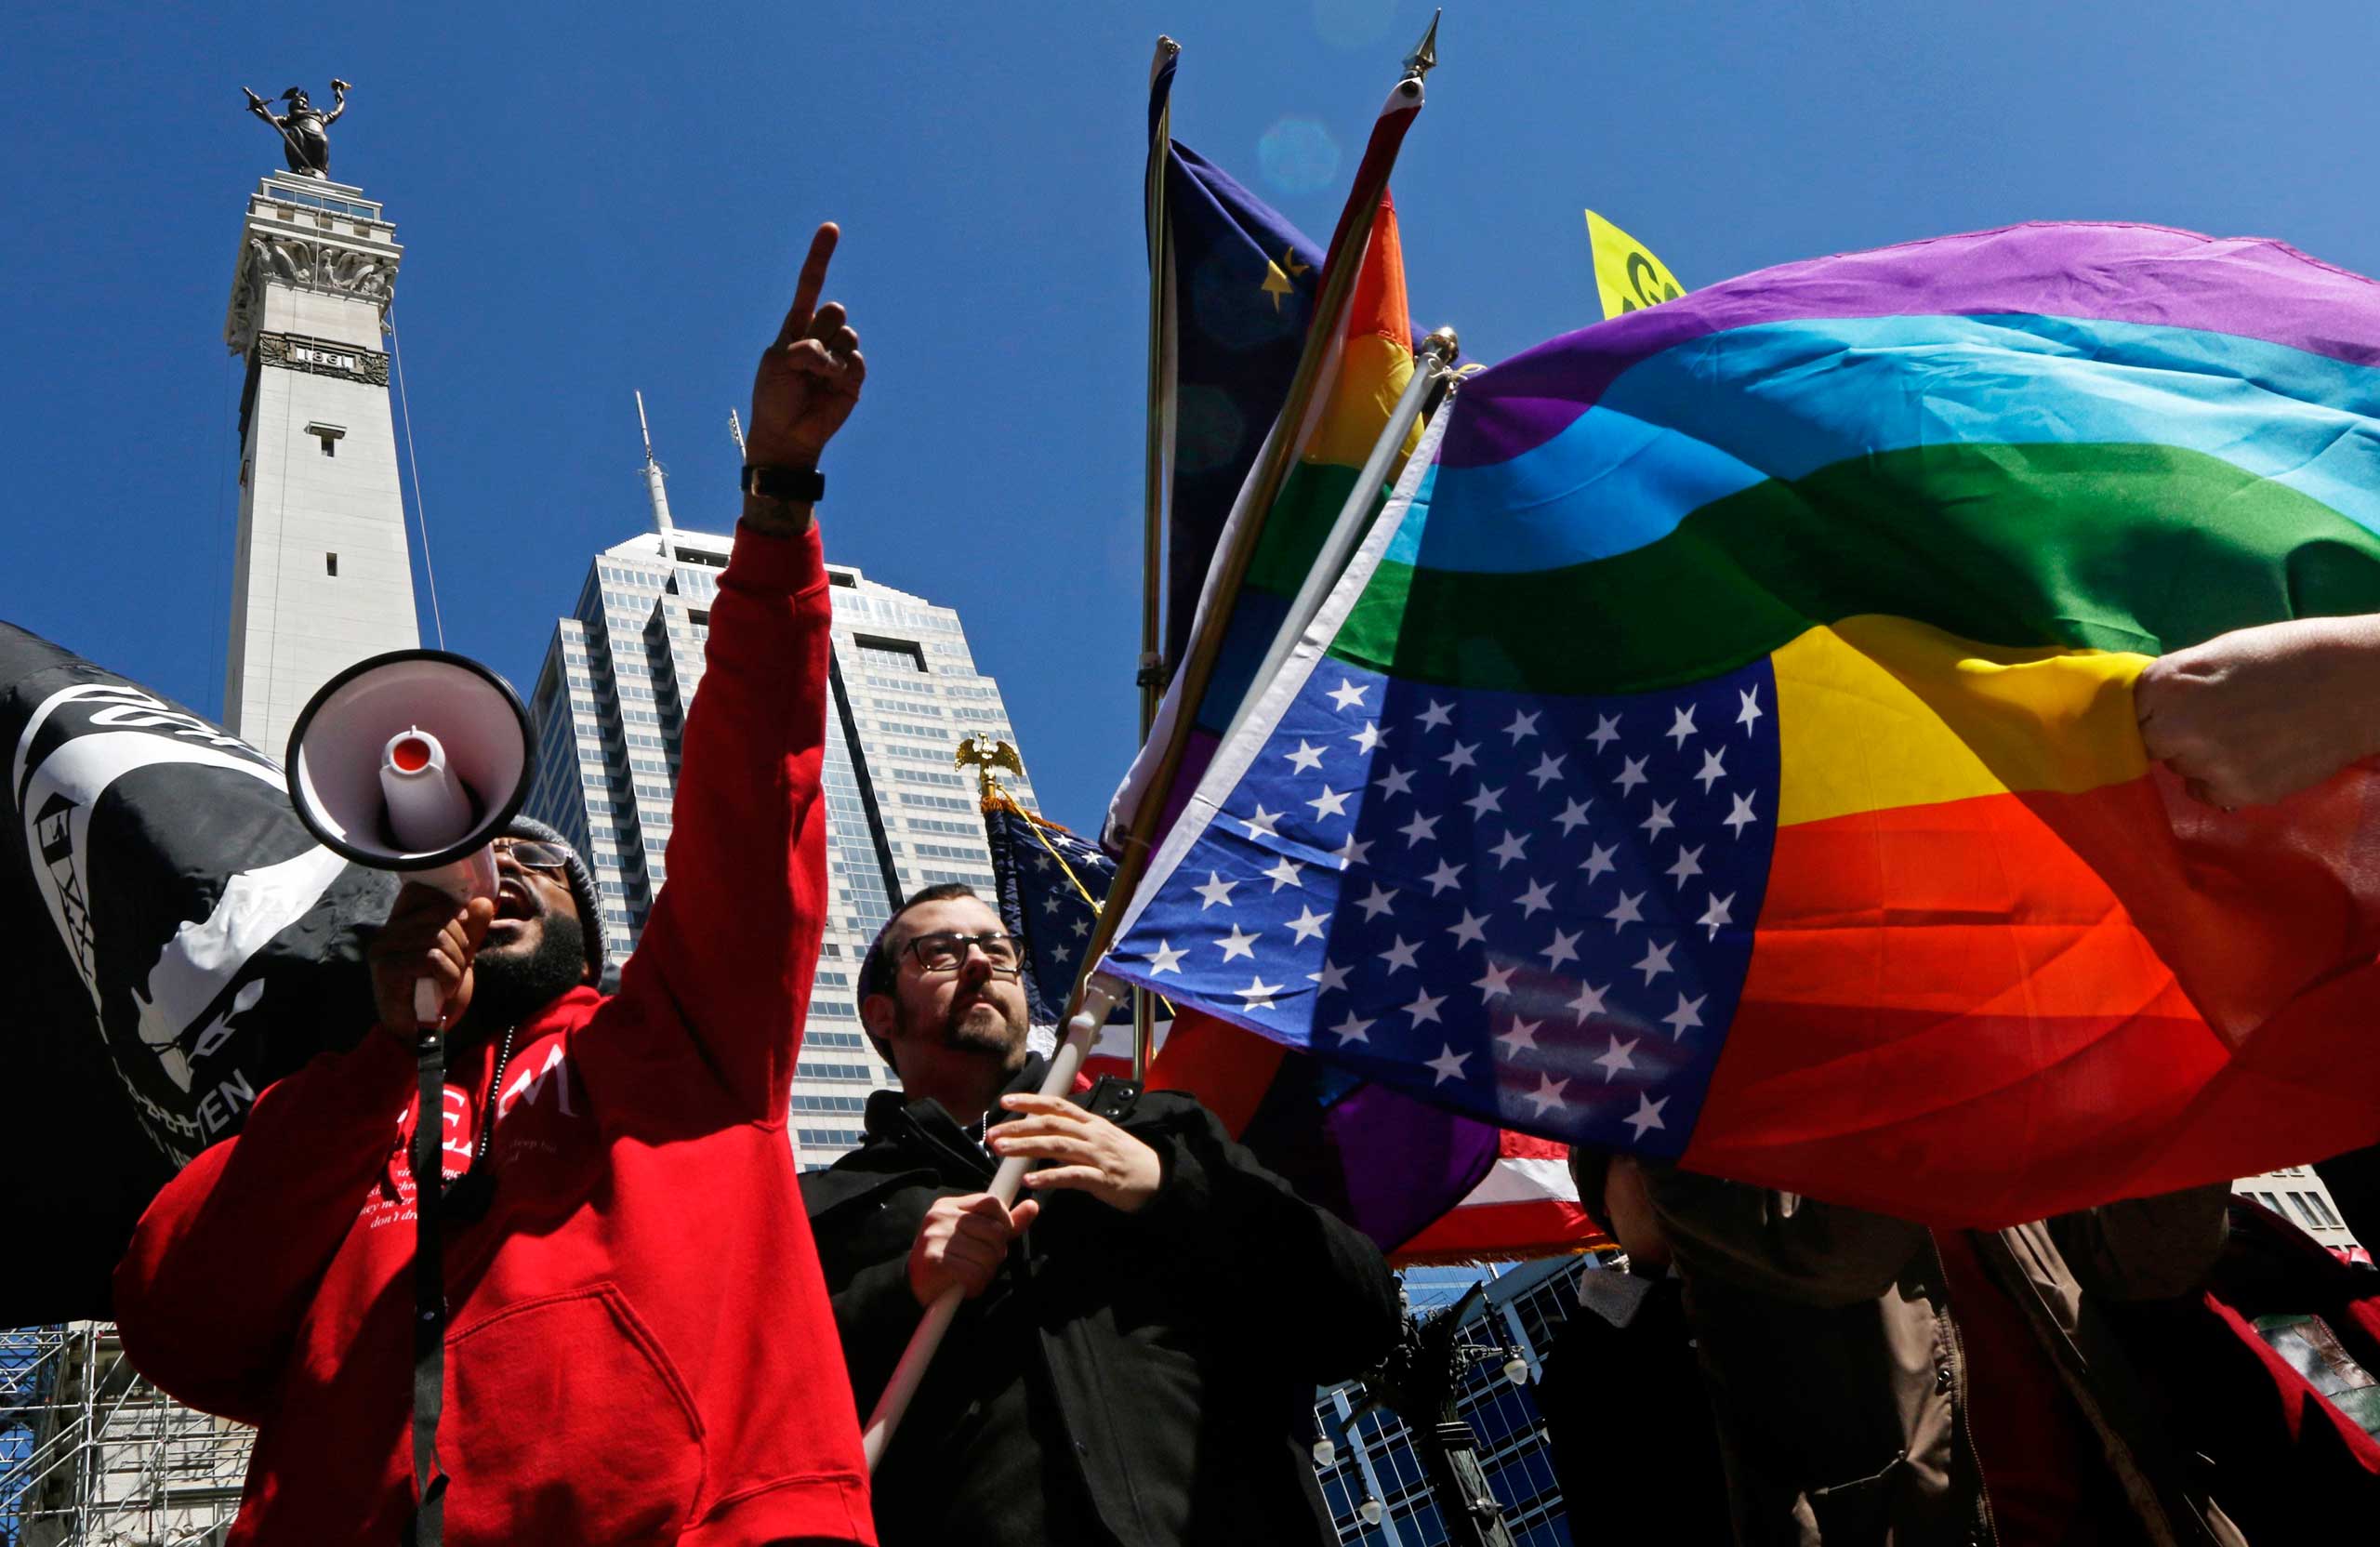 Demonstrators gathered at the Indiana State Capital to protest the Religious Freedom Restoration Act in Indianapolis on March 28, 2015. (Nate Chute—Reuters)